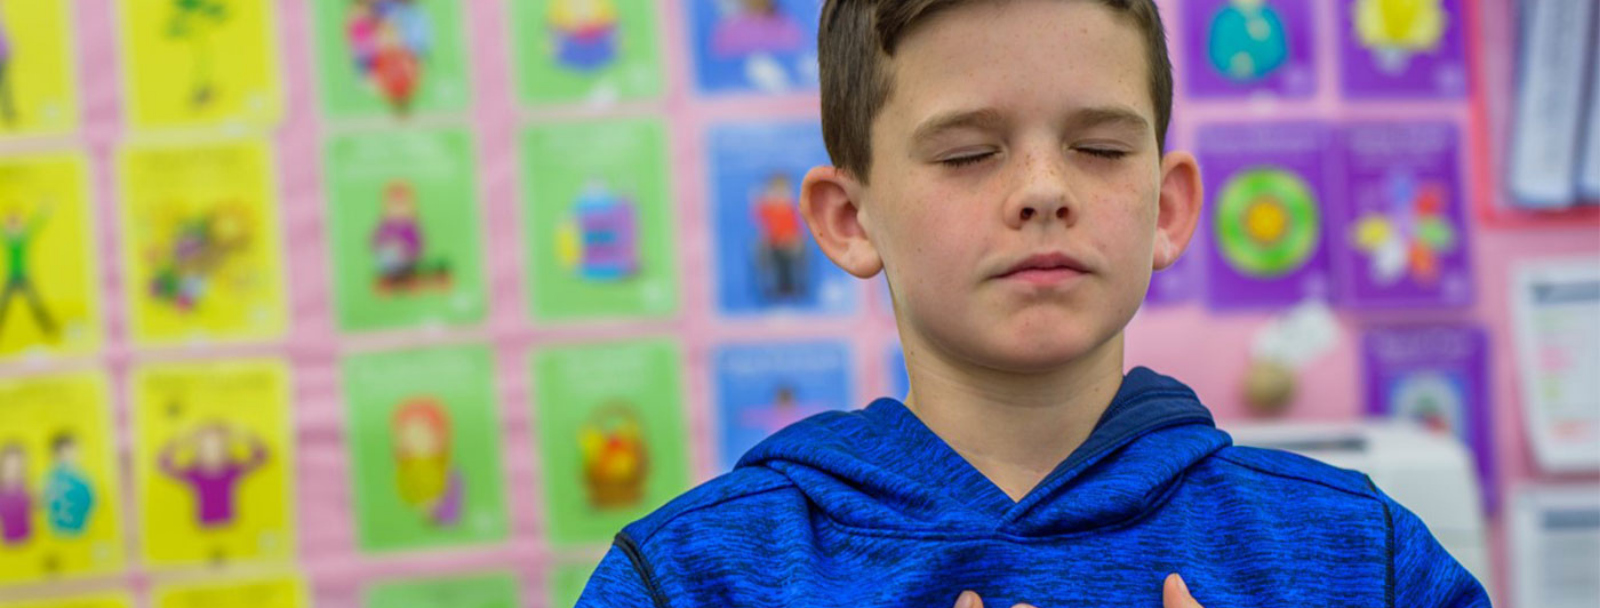 Yoga and Mindfulness in the Classroom